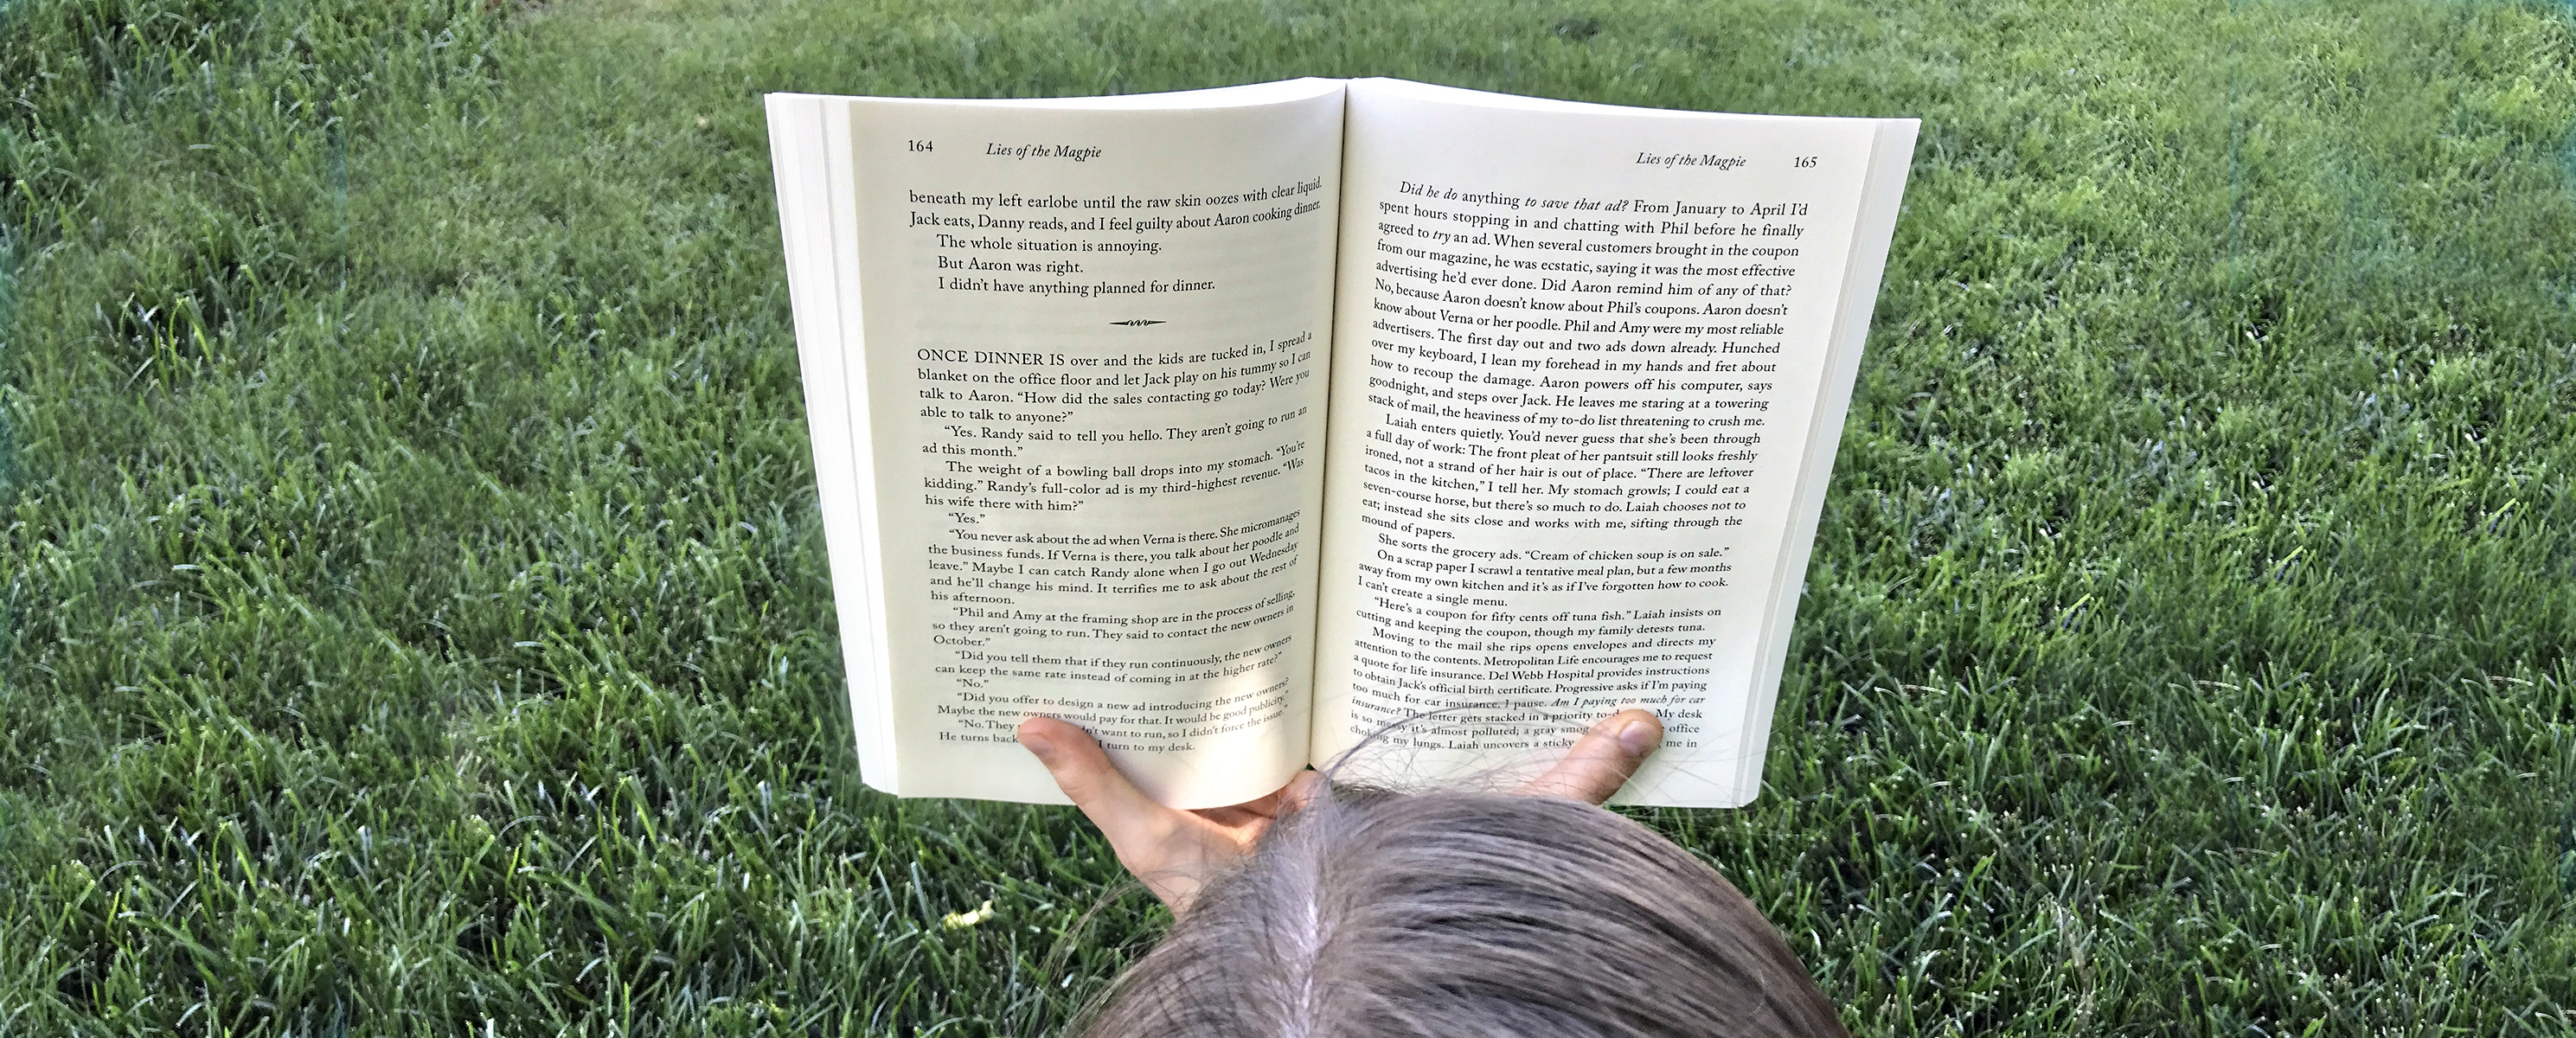 Woman in grass reading book